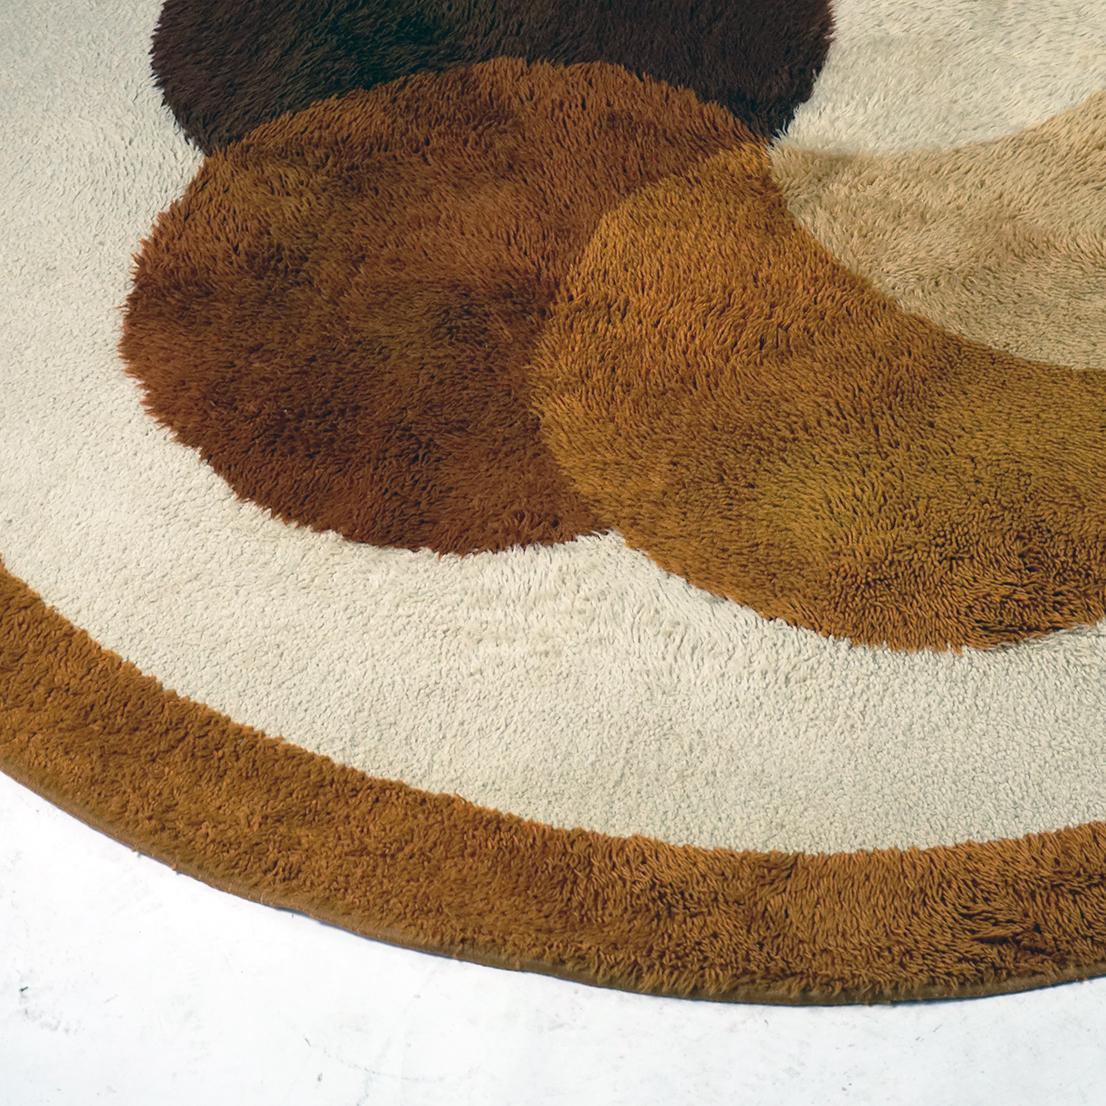 This circular brown beige and yellow Space age wool rug has been designed and produced in Netherlands by Desso in the 1970s.
Charming colours and very decorative flower design carpet in very good original condition without damages. 
It will look